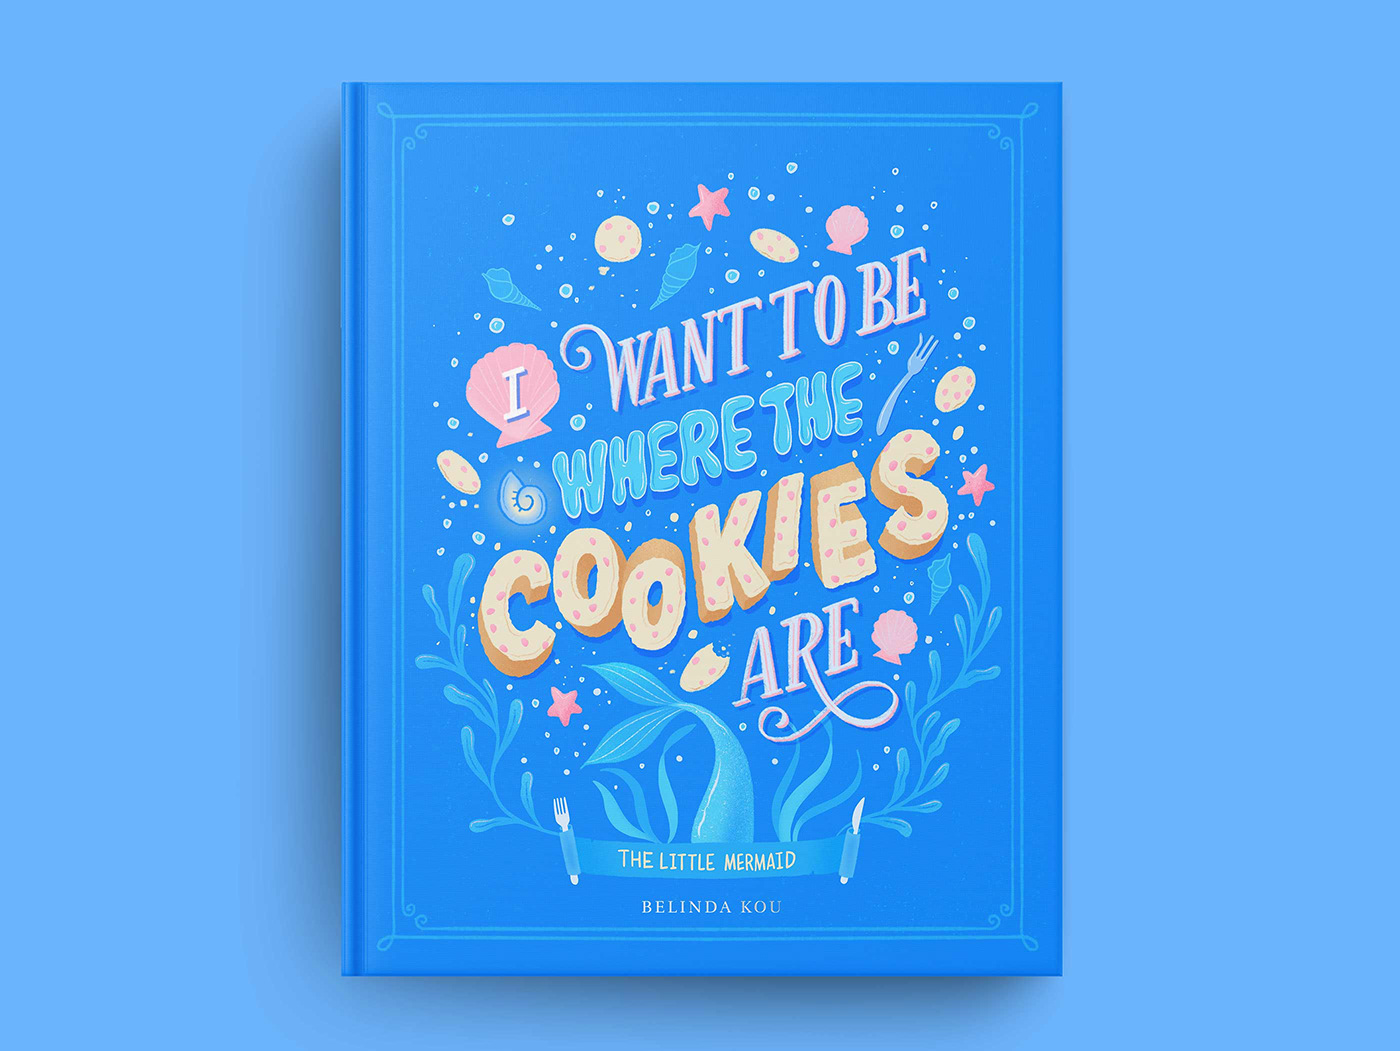 Little Mermaid book cover art featuring hand lettering and illustrations of fairy tale and food art